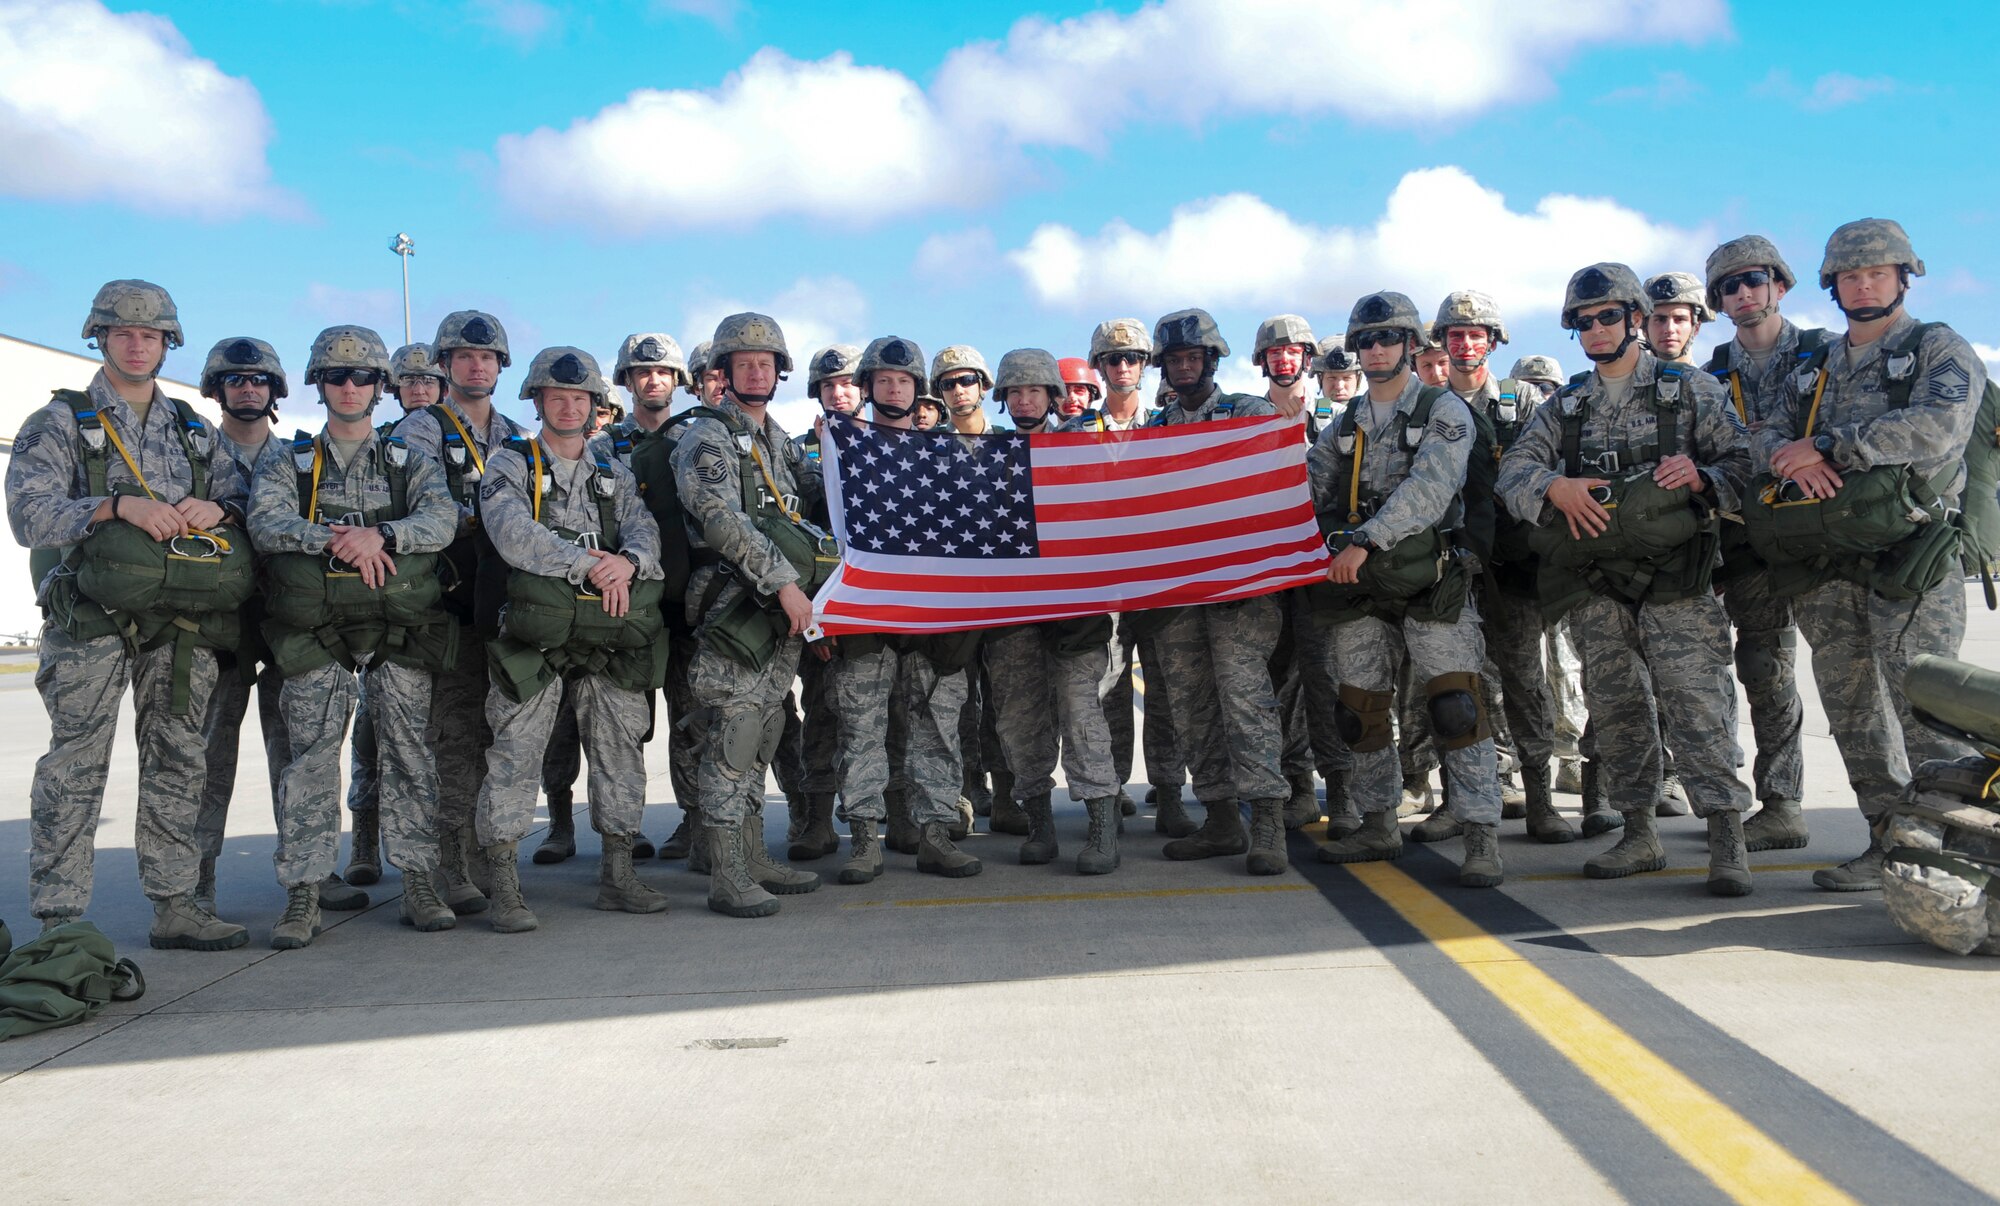 Members of the 820th Base Defense Group pose for a group photo before participating in a static line jump at Moody Air Force Base Ga., March 21, 2012. This was U.S. Air Force Chief Master Sgt. Tommy McDaniel’s last jump before retiring. (U.S. Air Force photo by Airman 1st Class Douglas Ellis/Released)
